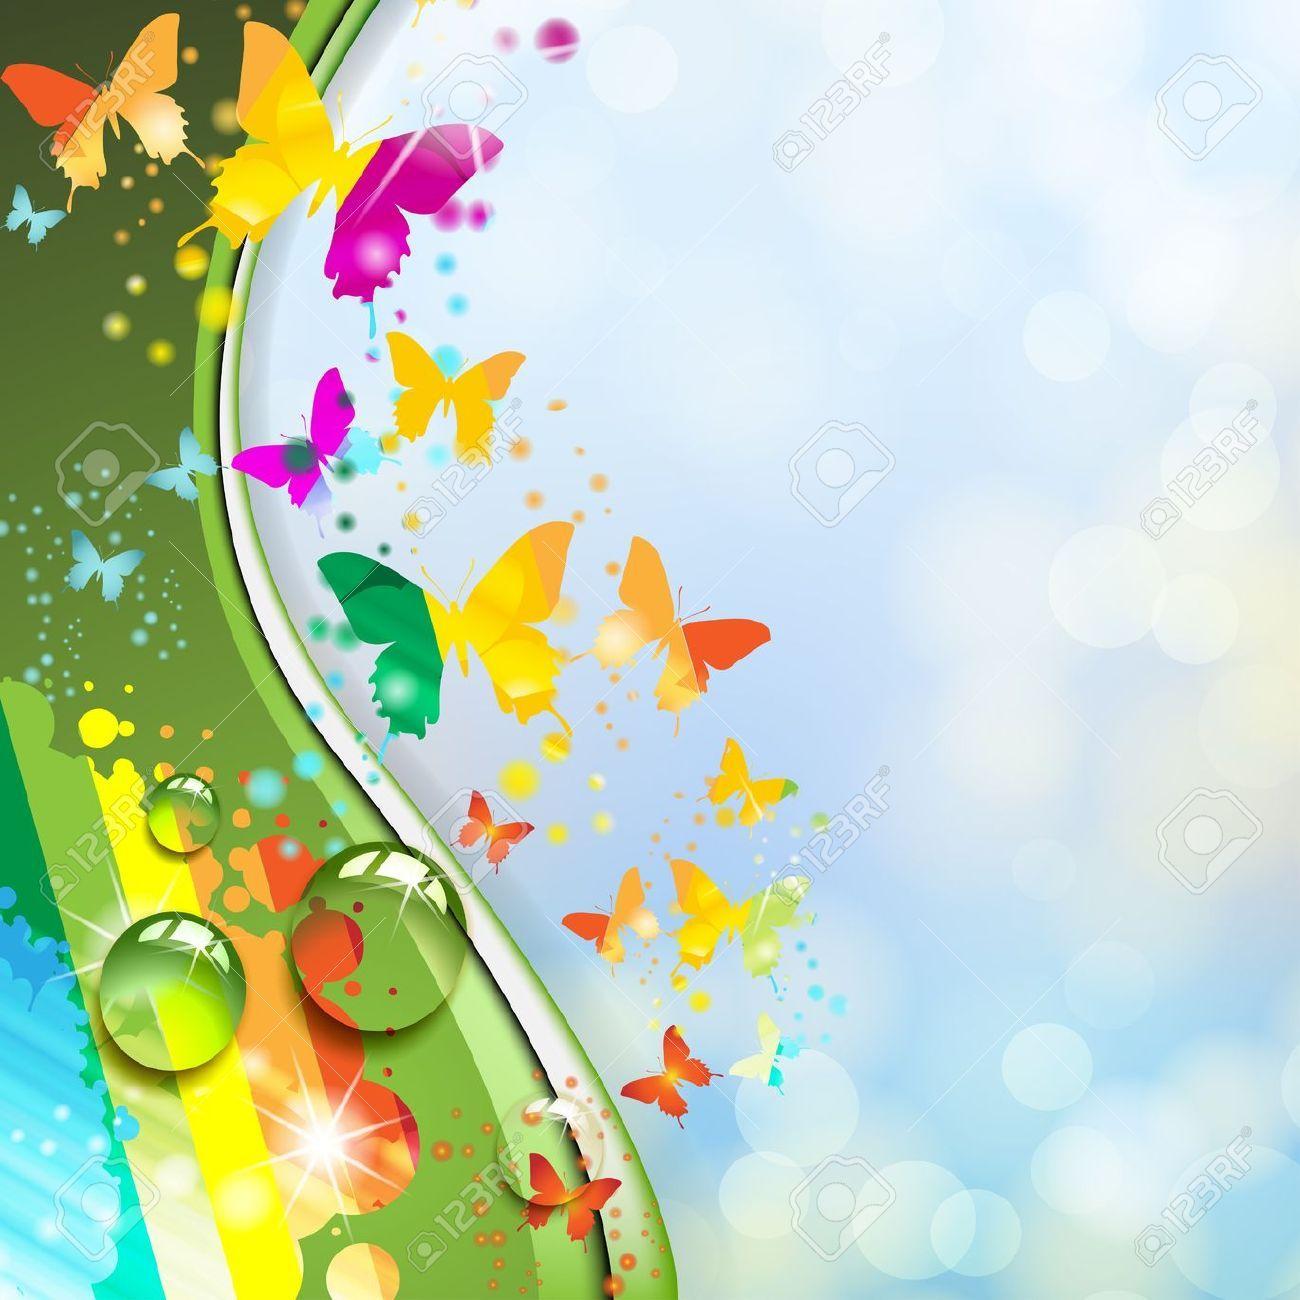 Colorful Butterfly Wallpaper. Gallery Of Wallpaper For Butterflies